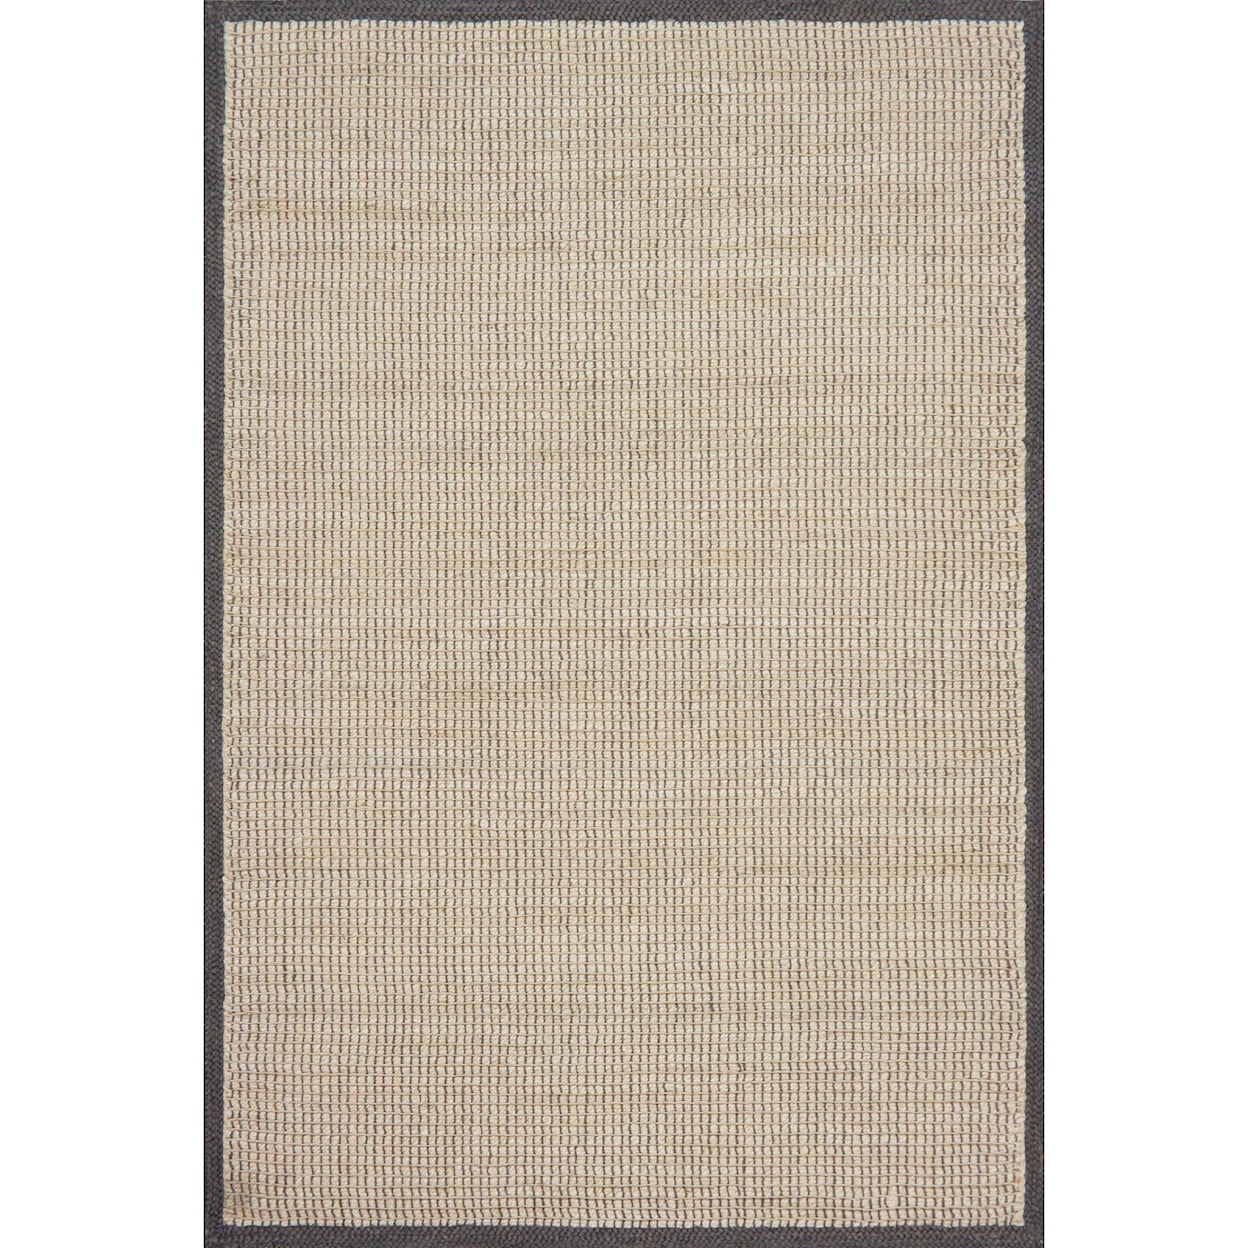 Magnolia Home by Joanna Gaines for Loloi Sydney 2' 3" x 3' 9" Rectangle Rug